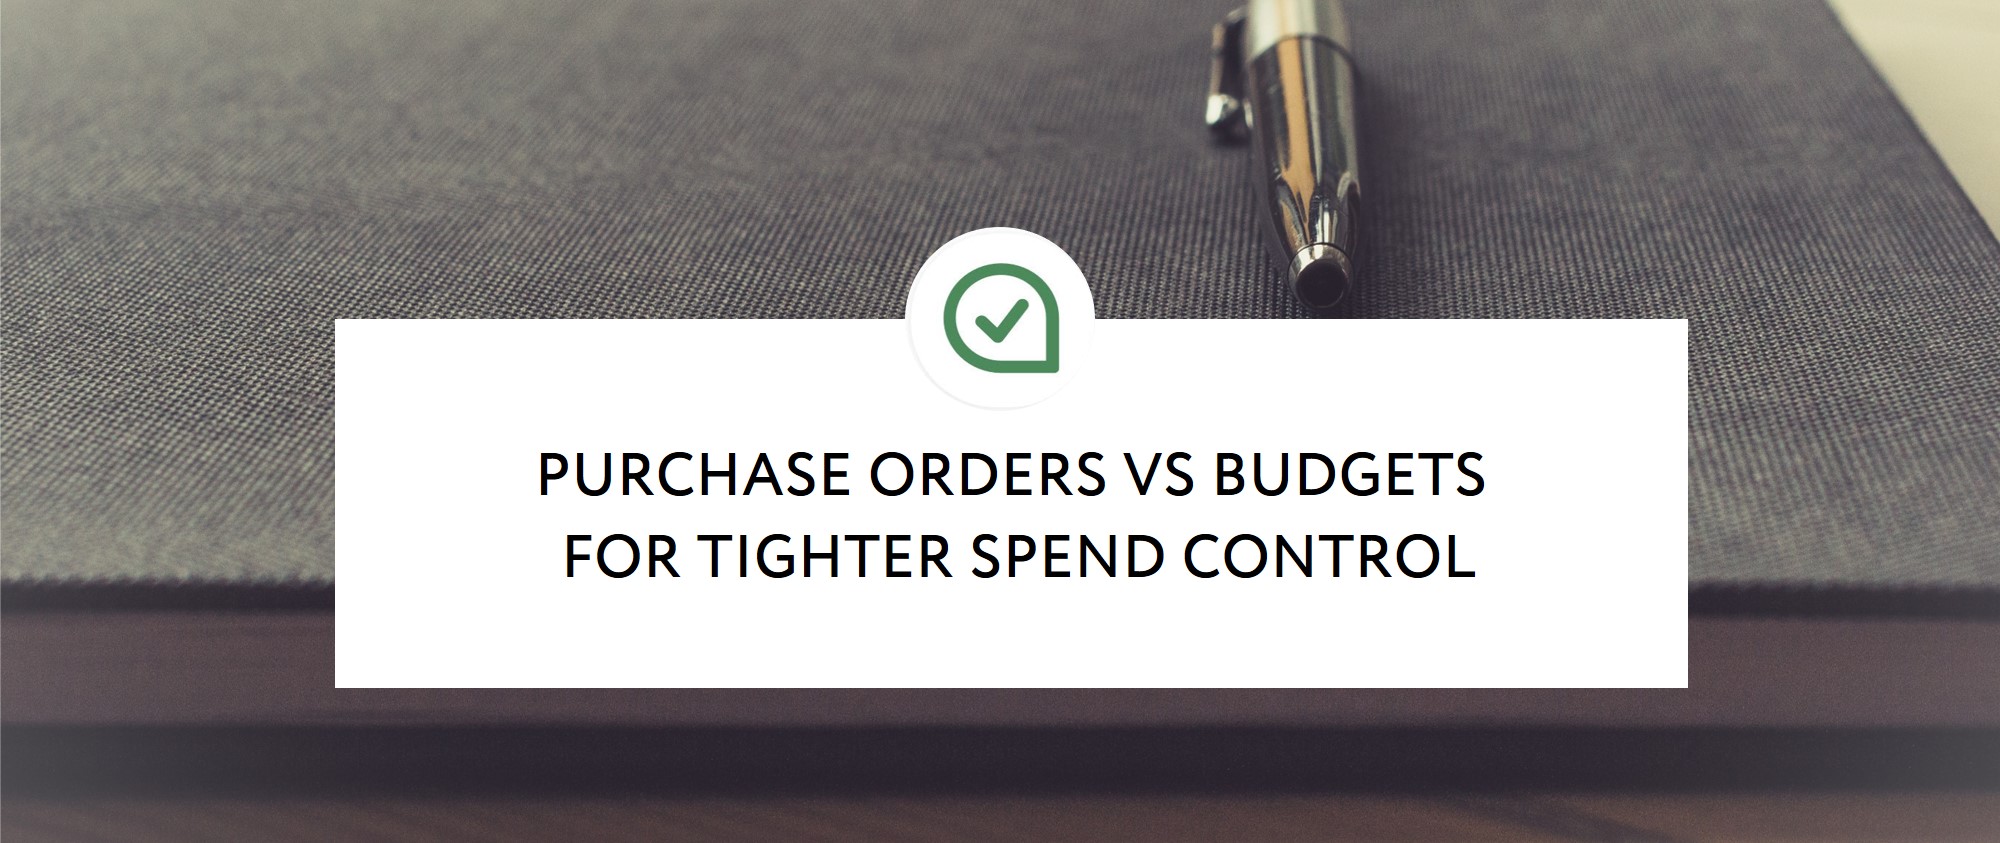 PURCHASE ORDERS VS BUDGETS FOR TIGHTER SPEND CONTROL